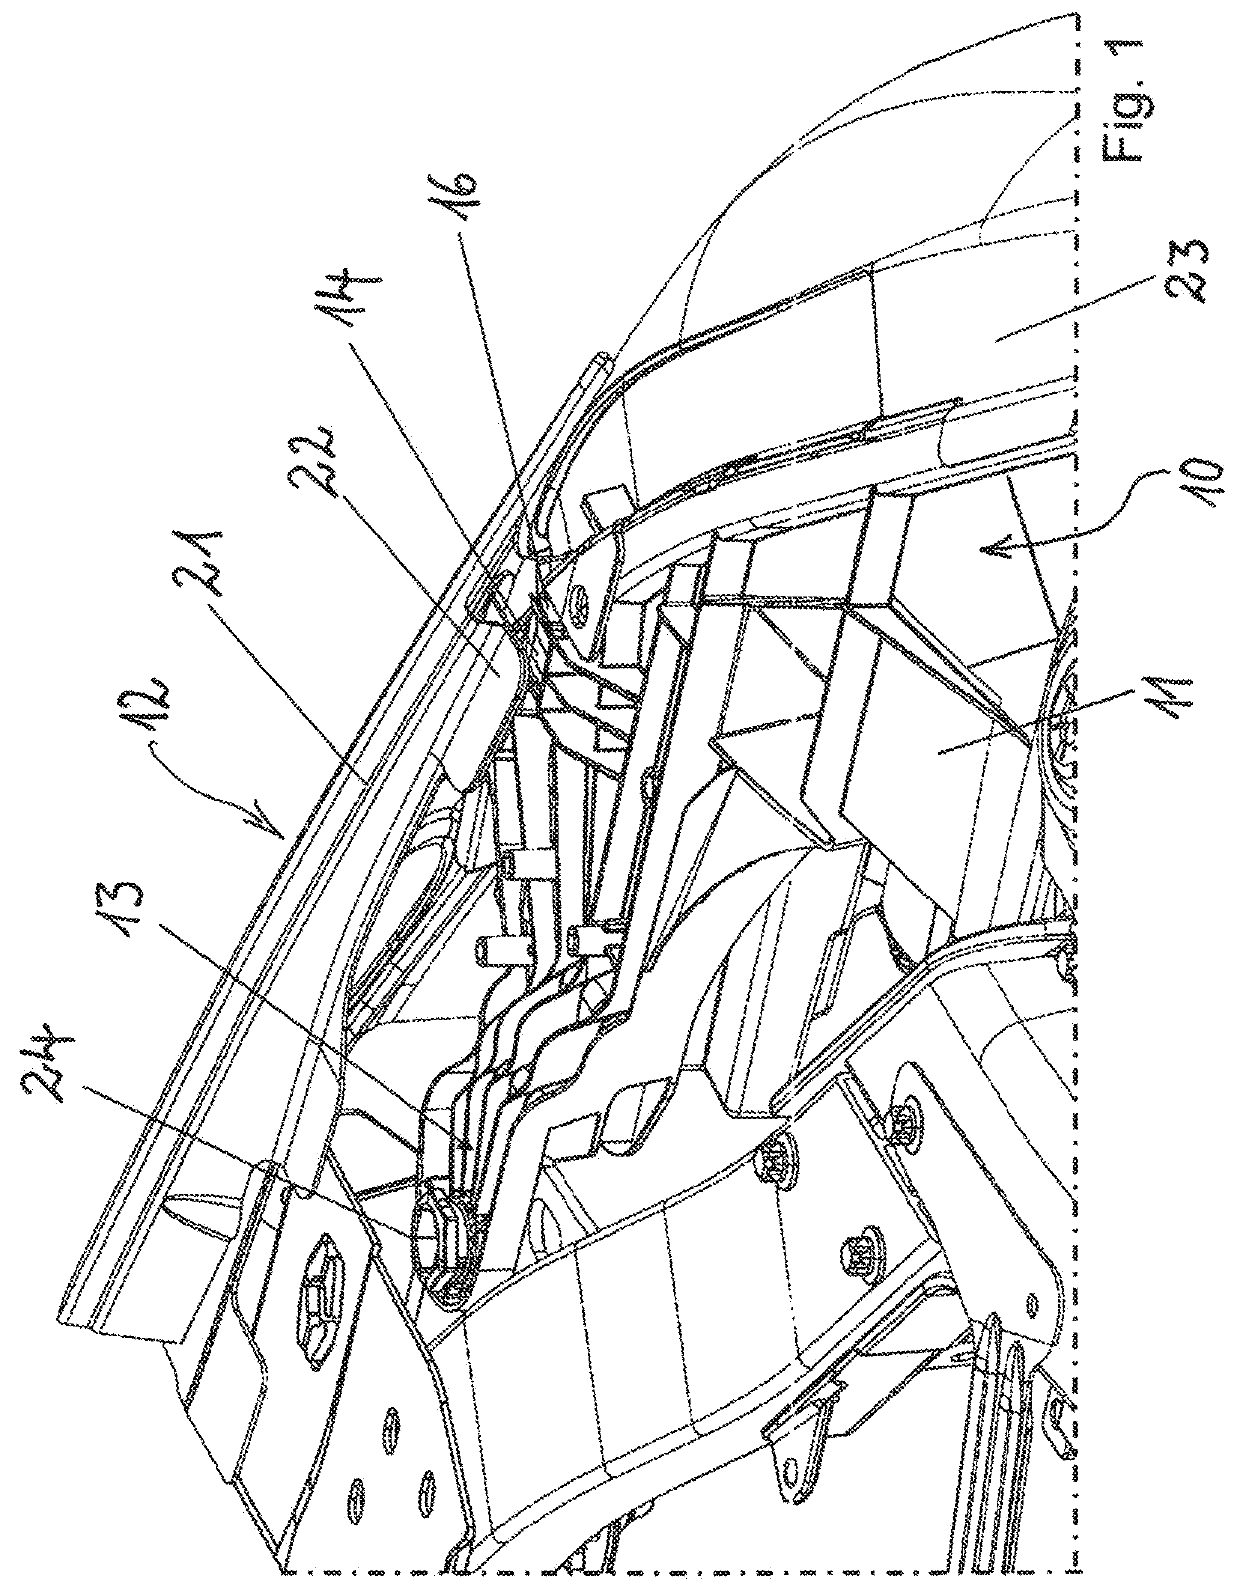 Arrangement of a headlight in a vehicle having damage protection for the event of a crash